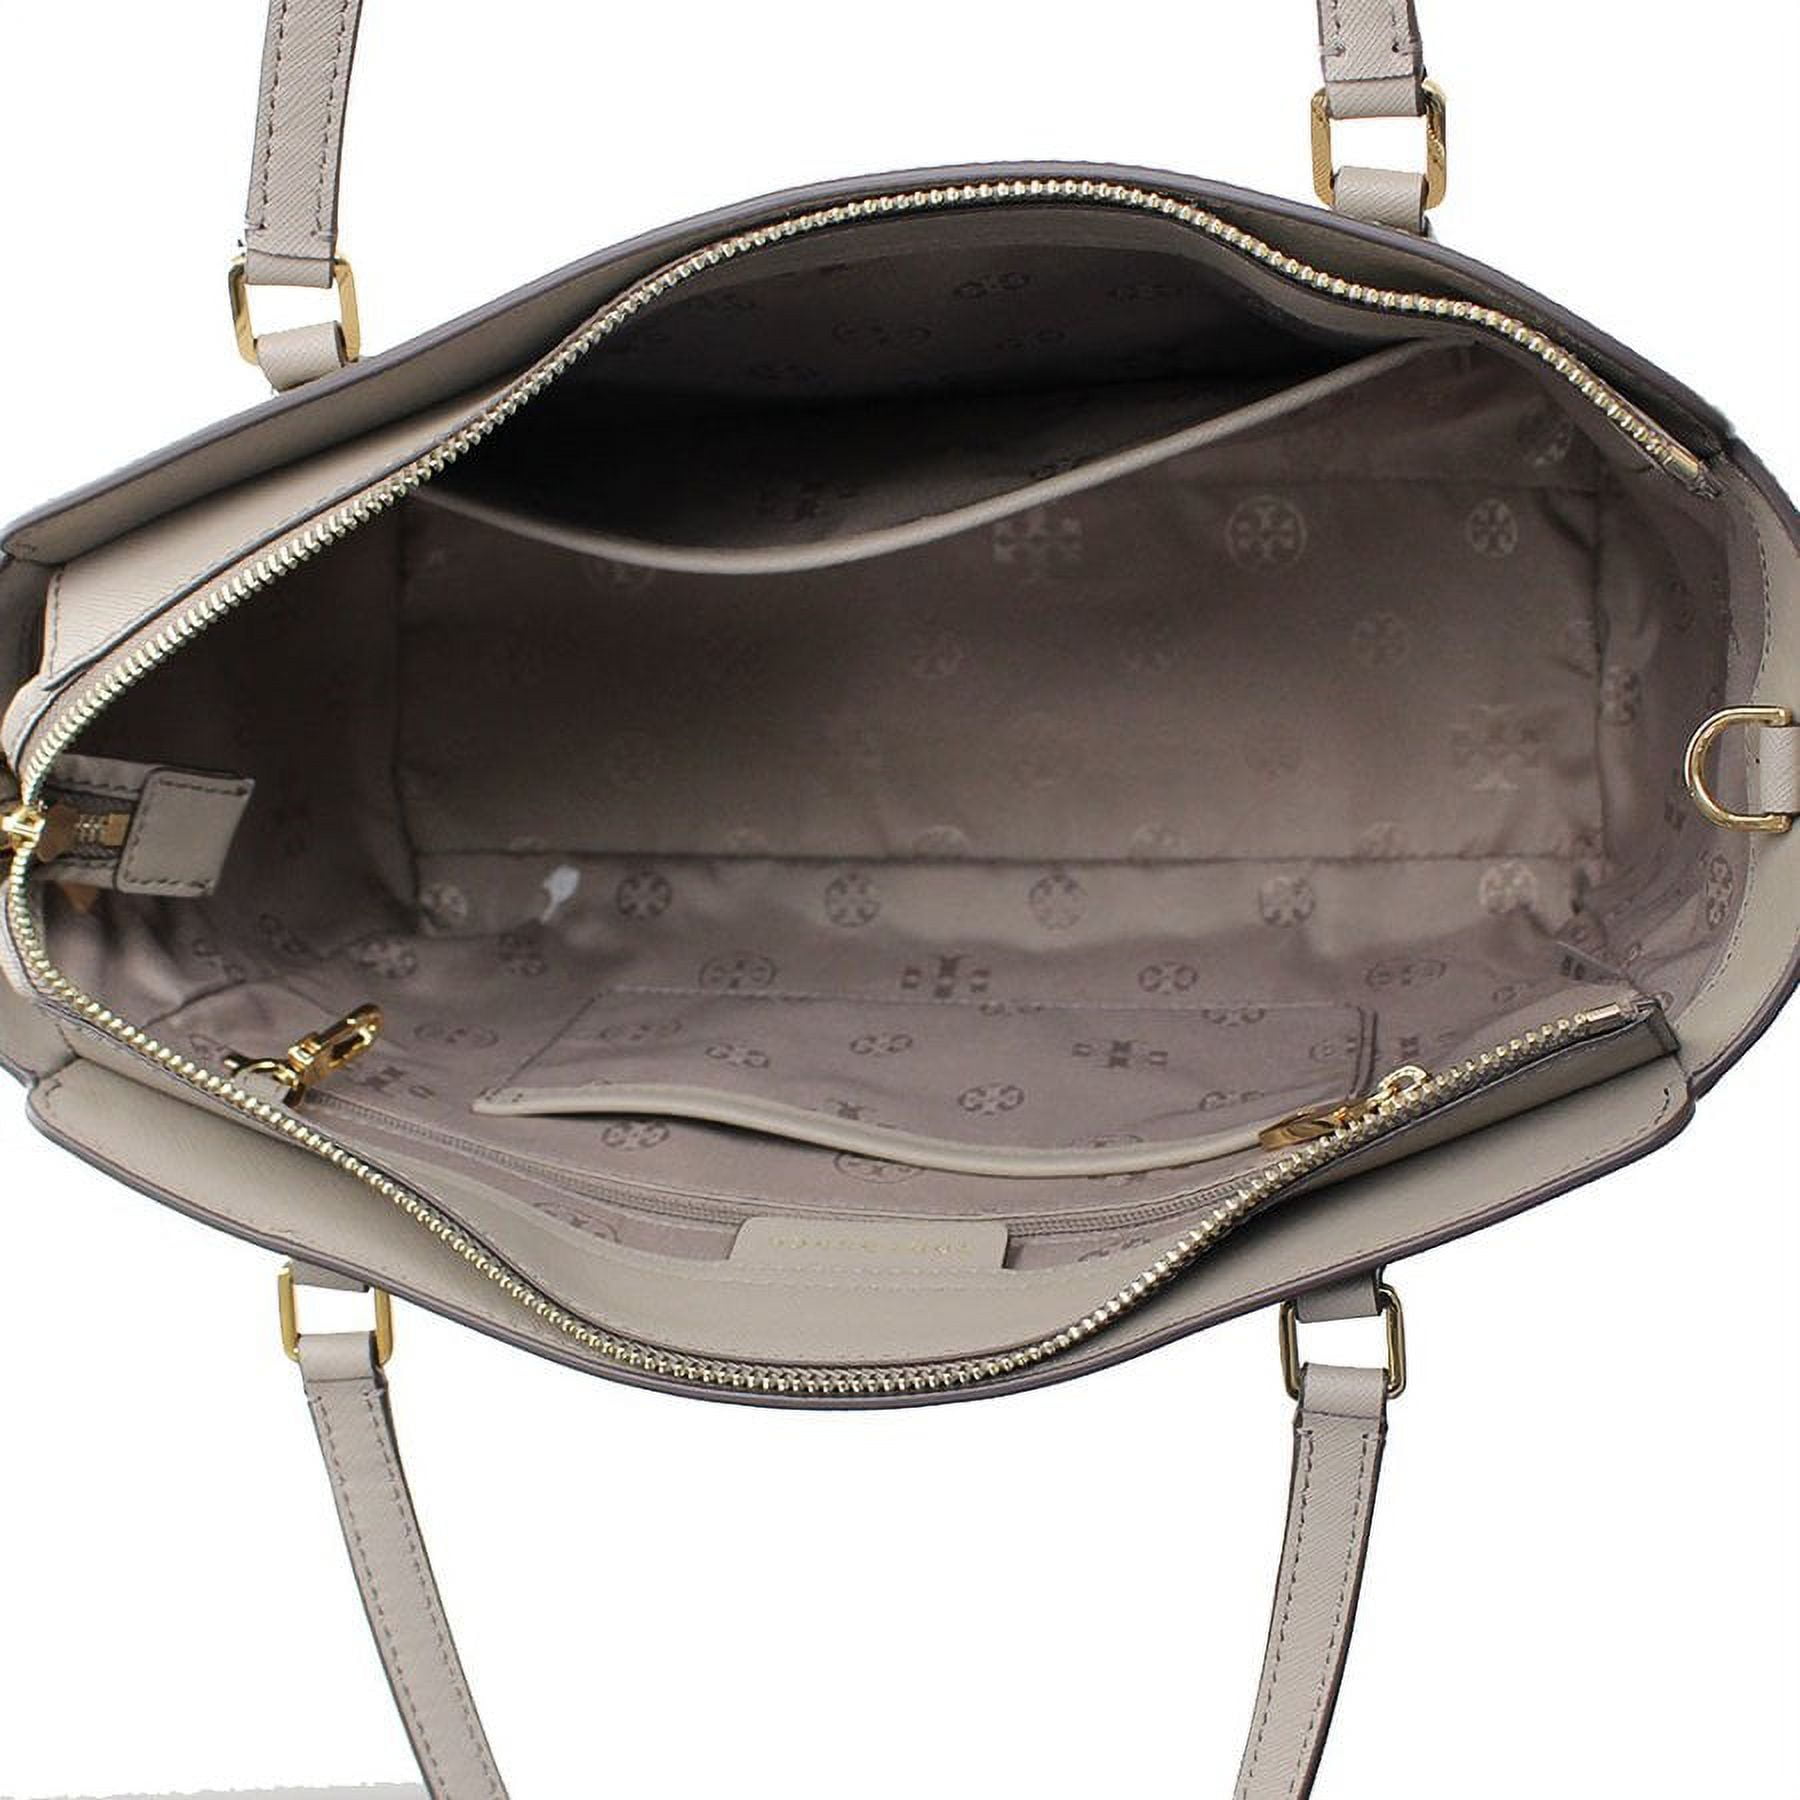 Tory Burch, Bags, Tory Burch Emerson Saffiano Leather French Grey Large  Buckle Tote Shoulder Bag